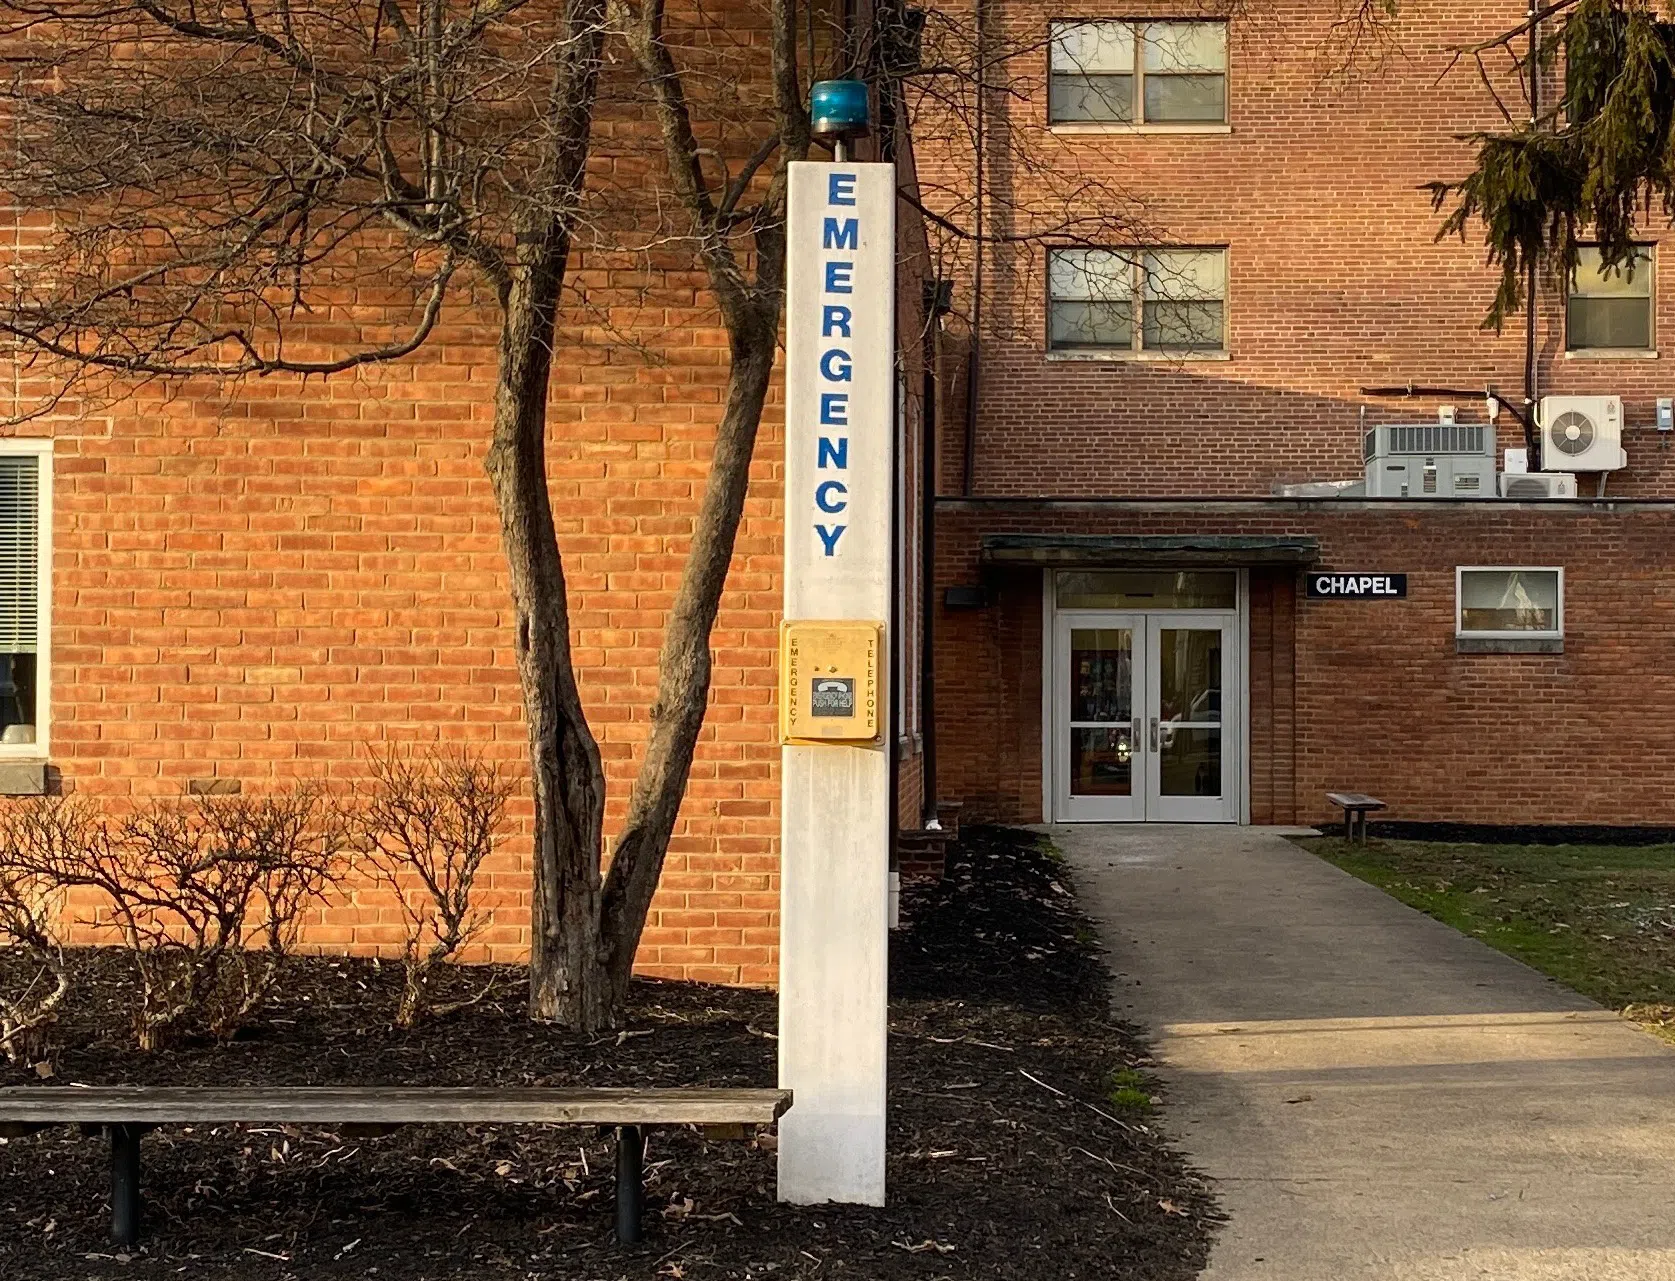 A white pole with a blue light at the top. It reads: "Emergency" in all capital letters.